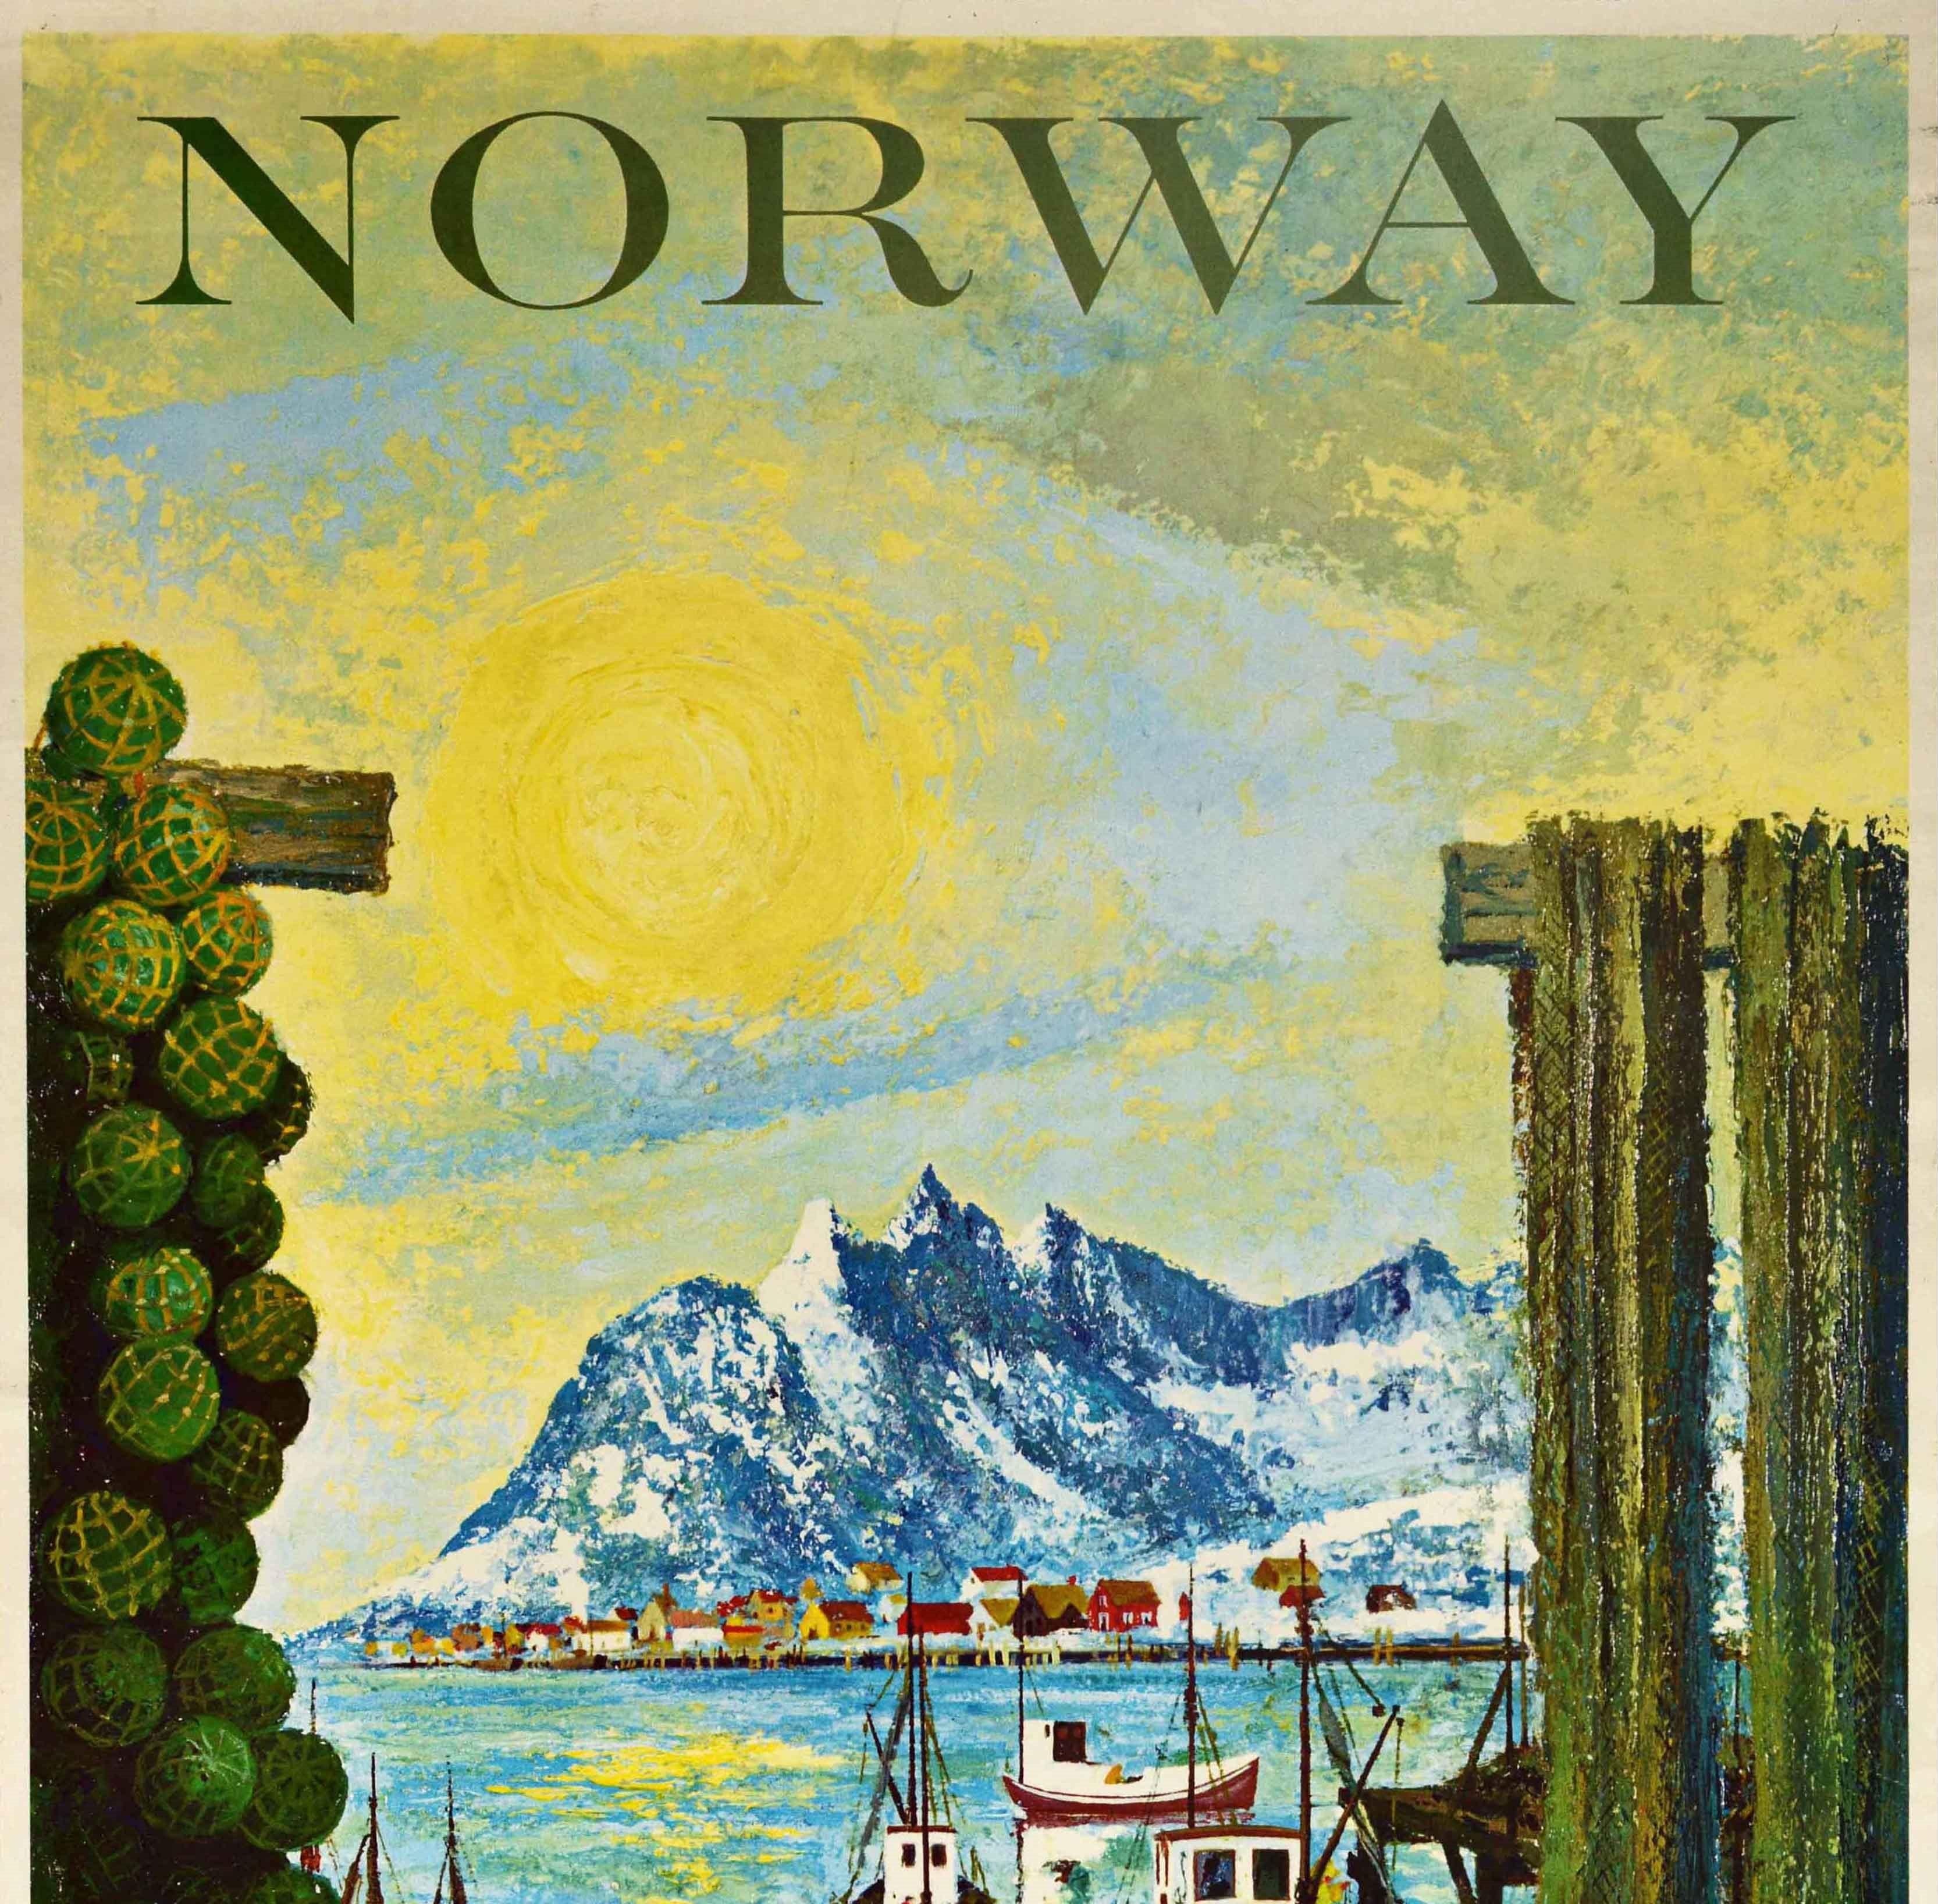 Original Vintage Travel Poster Norway Fjord Fishing Boats Mountains Scenic View - Print by Thorsen